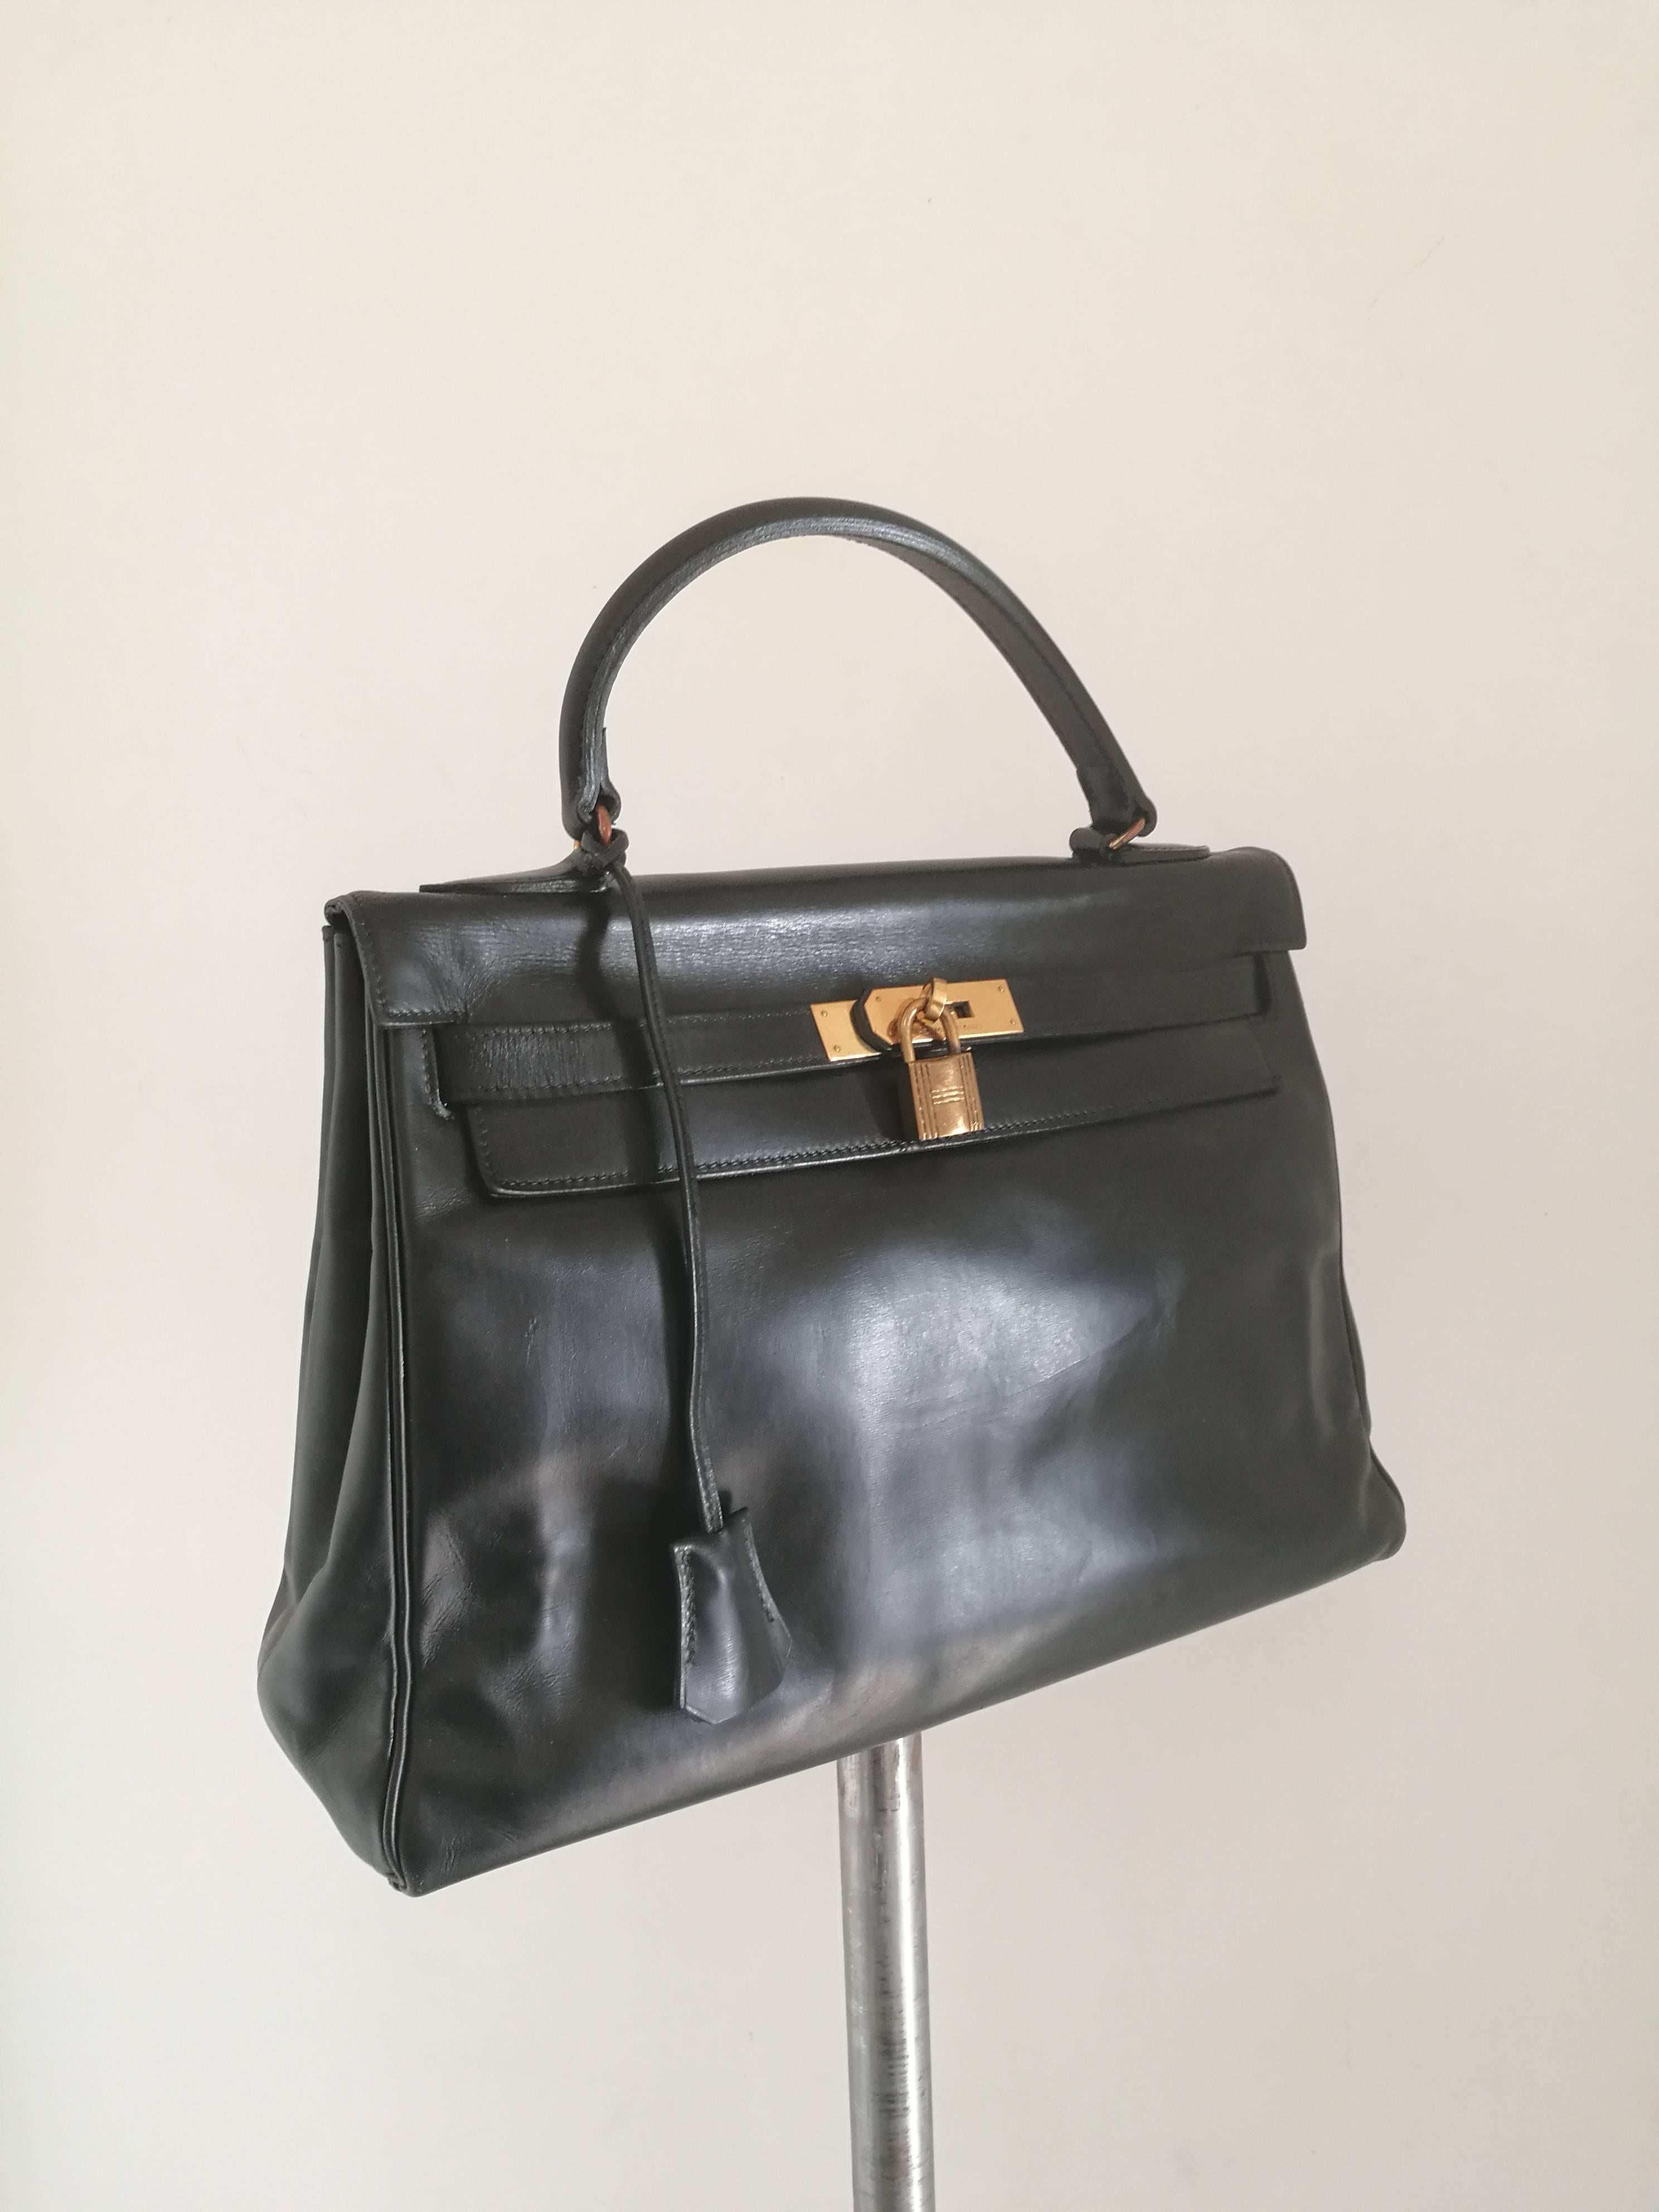 Hermes Kelly 32 Black Leather

Gold tone hardware

Made in France

Please note that as a vintage item it has some signs of use

